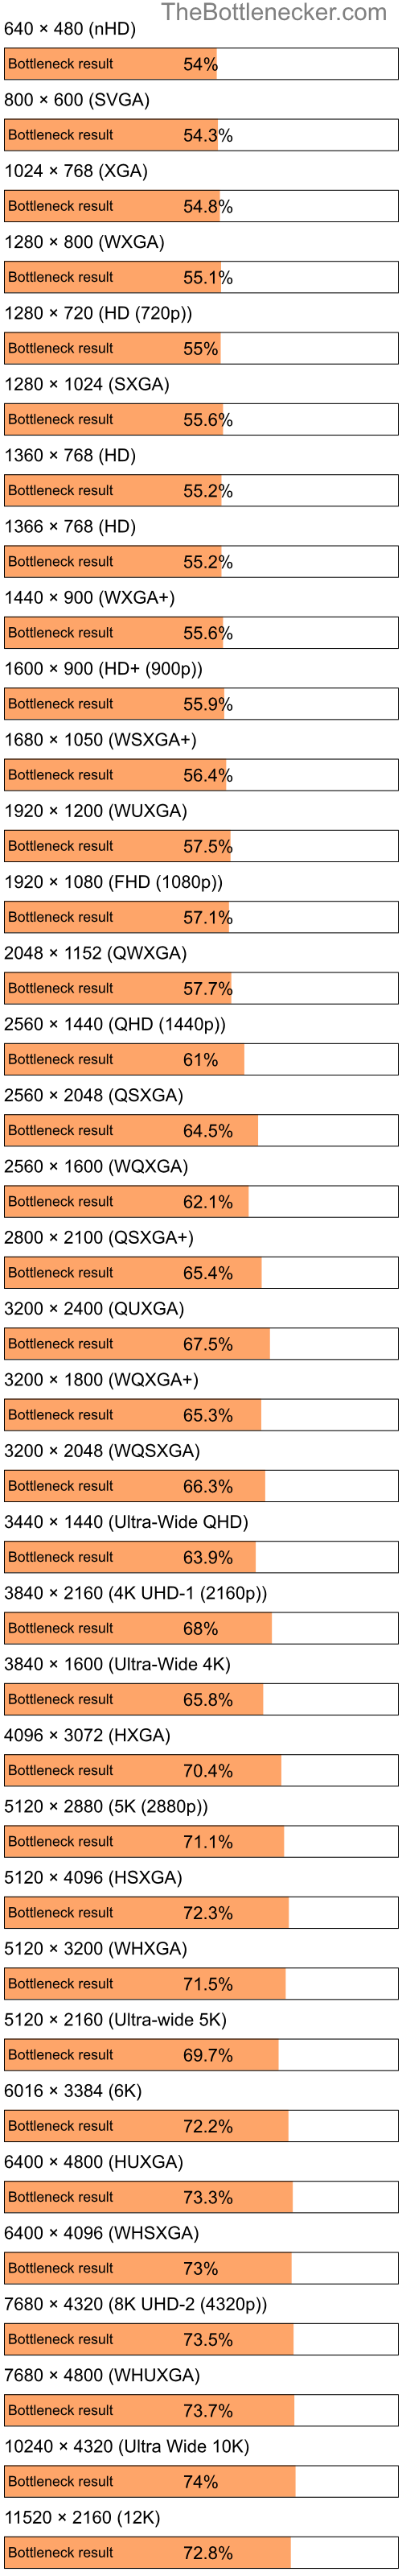 Bottleneck results by resolution for Intel Celeron M 410 and AMD Mobility Radeon HD 3470 in Processor Intense Tasks